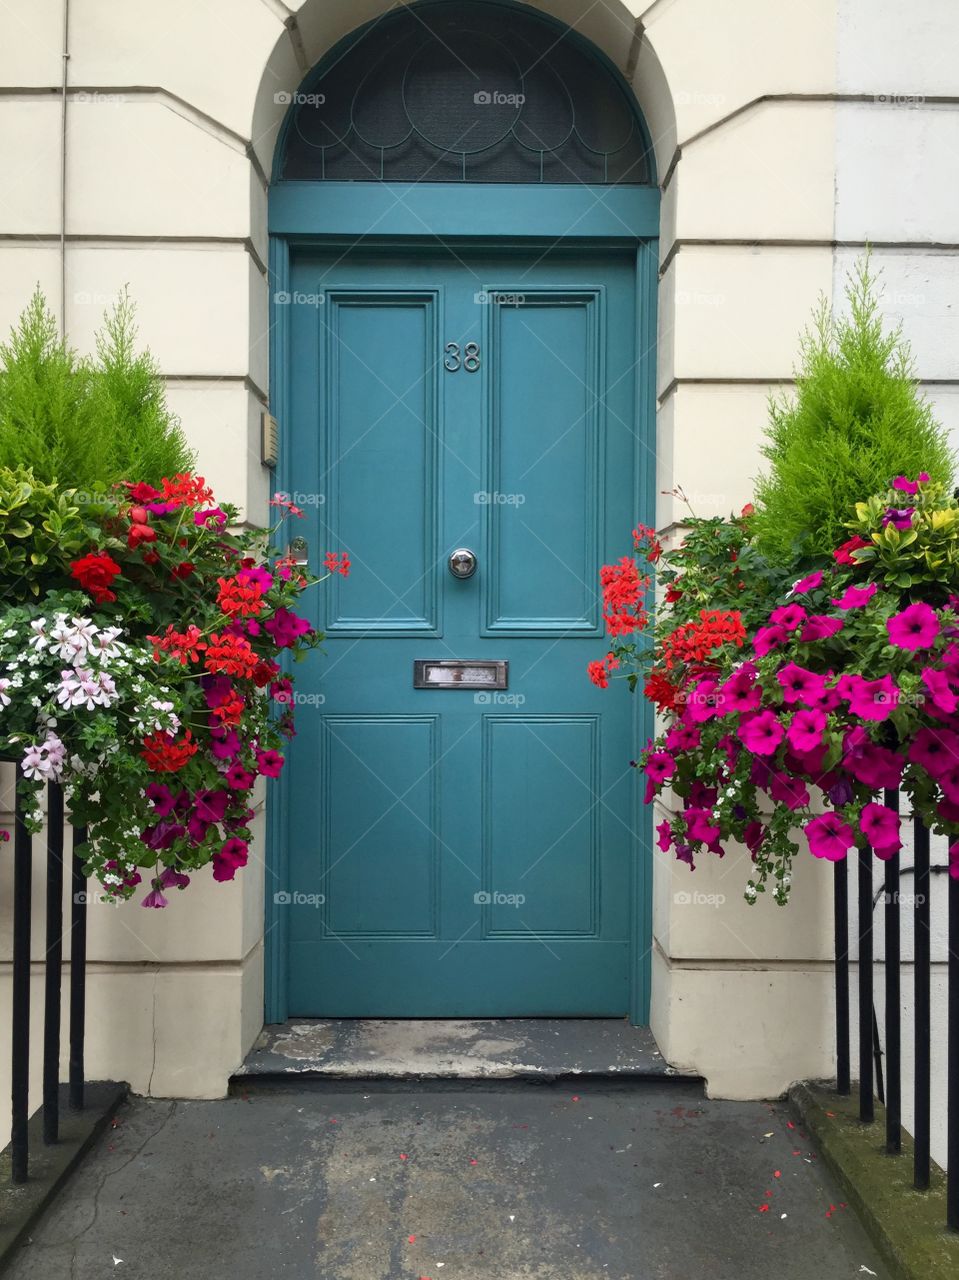 One of my favorite parts of London? The flowers that are constantly in bloom and decorating the city. 